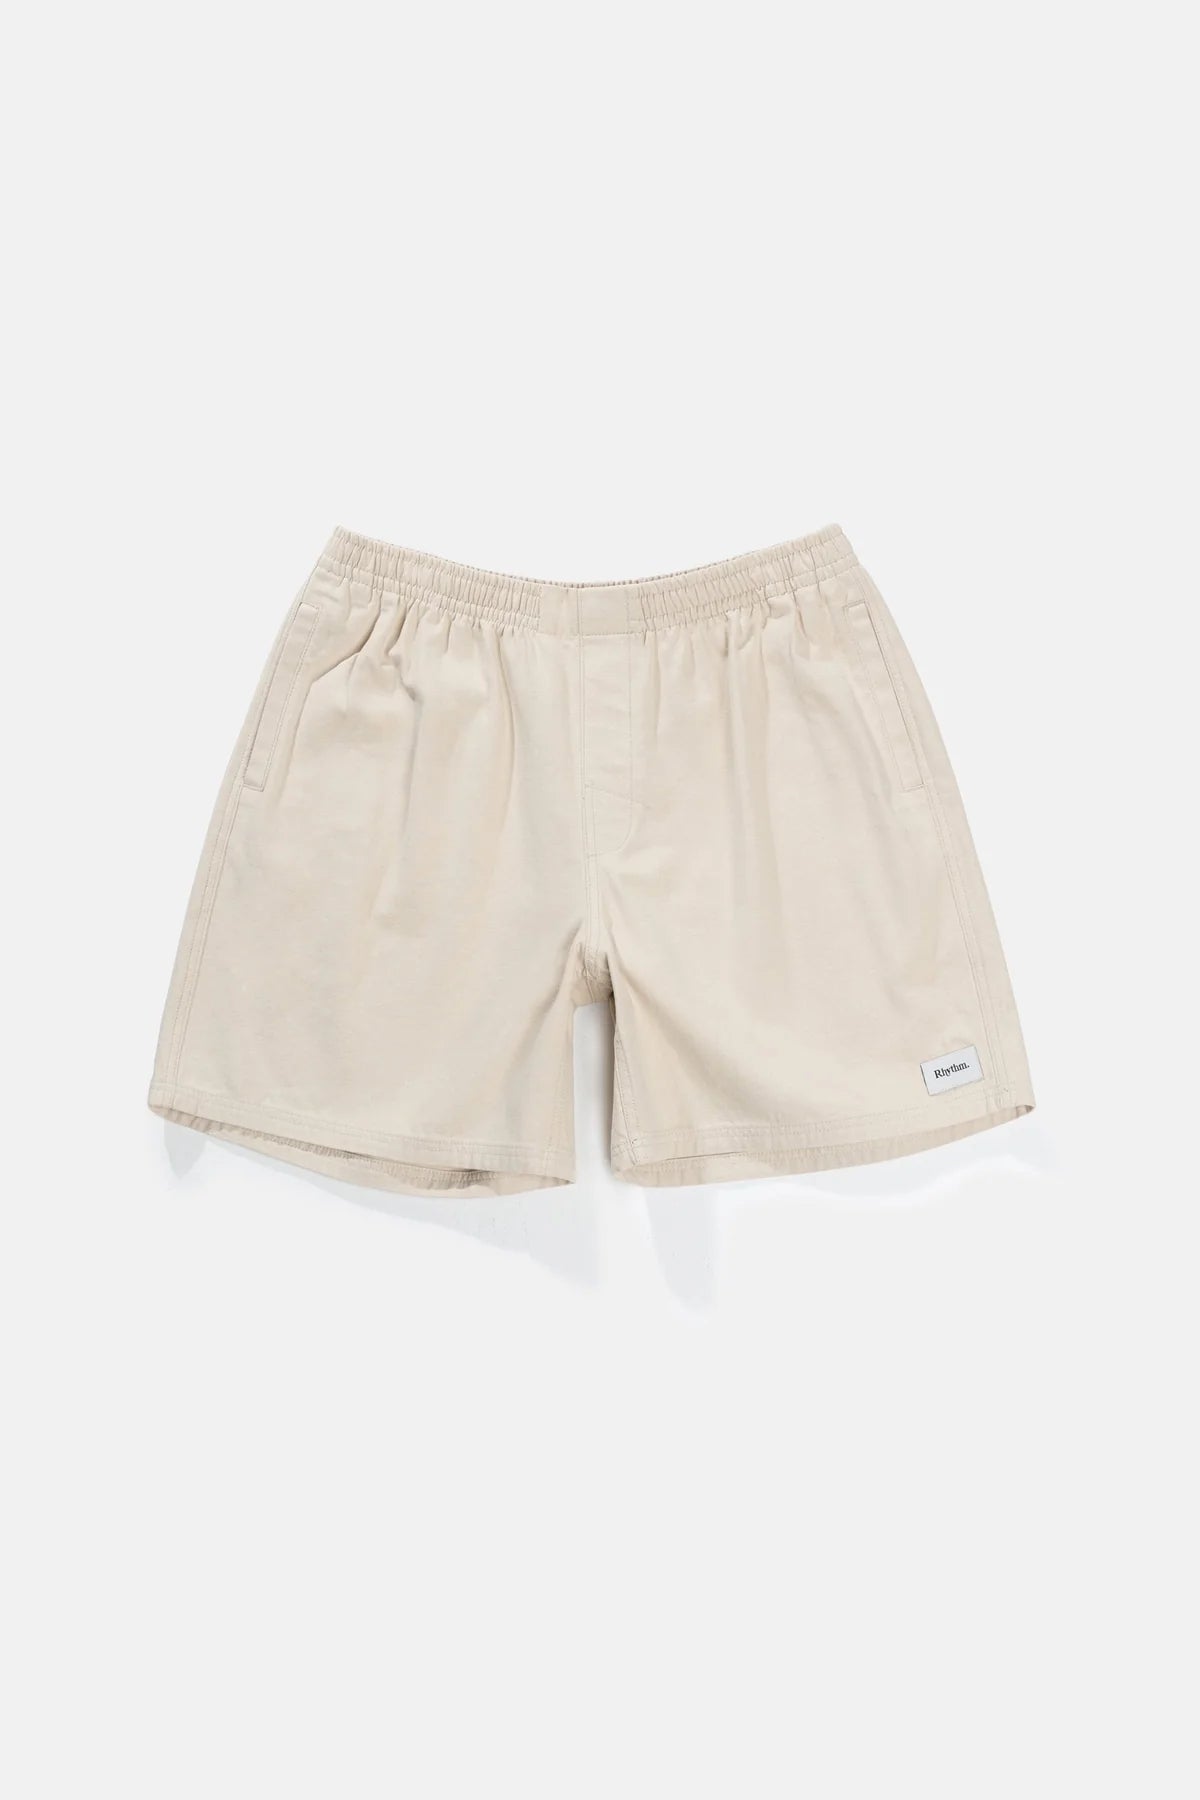 Rhythm Mod Twill Jam Natural | Collective Request 